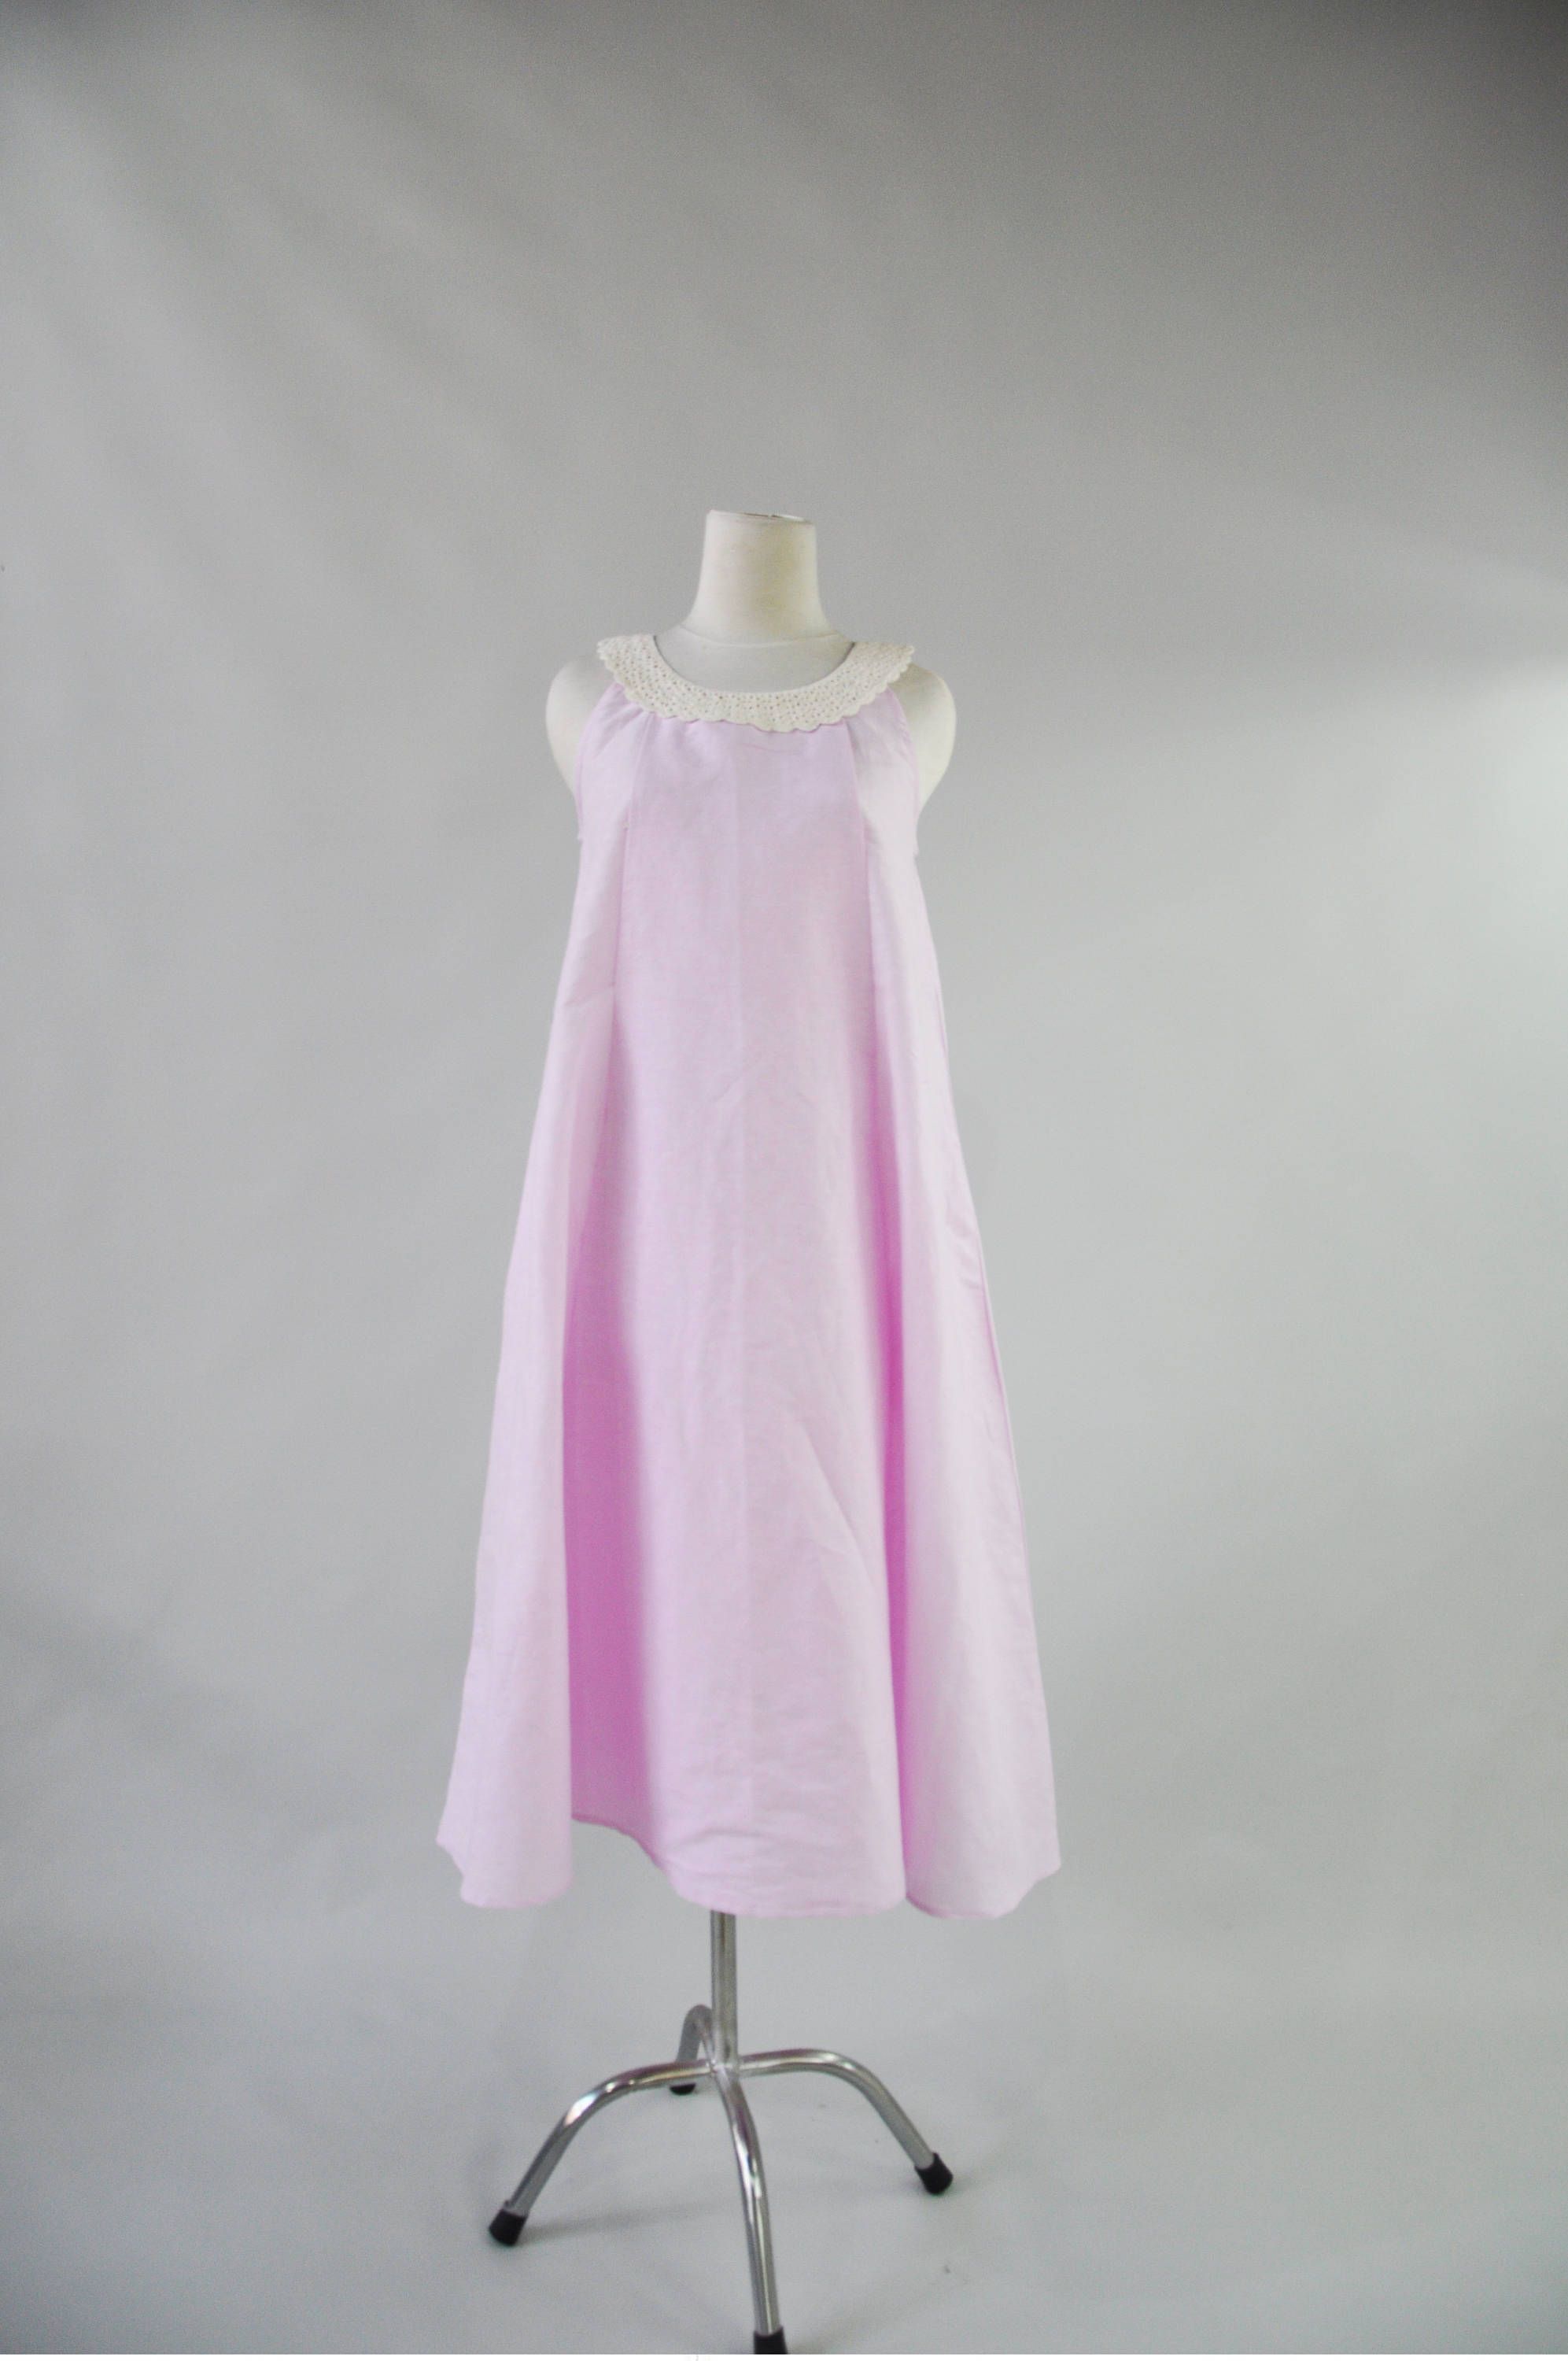 Full Size of Baby Shower:pink Maternity Dress Maternity Gowns For Photography Maternity Dresses For Baby Shower Mom And Dad Baby Shower Outfits Non Maternity Dresses For Baby Shower Celebrity Baby Shower Dresses White Maternity Dress For Baby Shower 2 Searches Left.